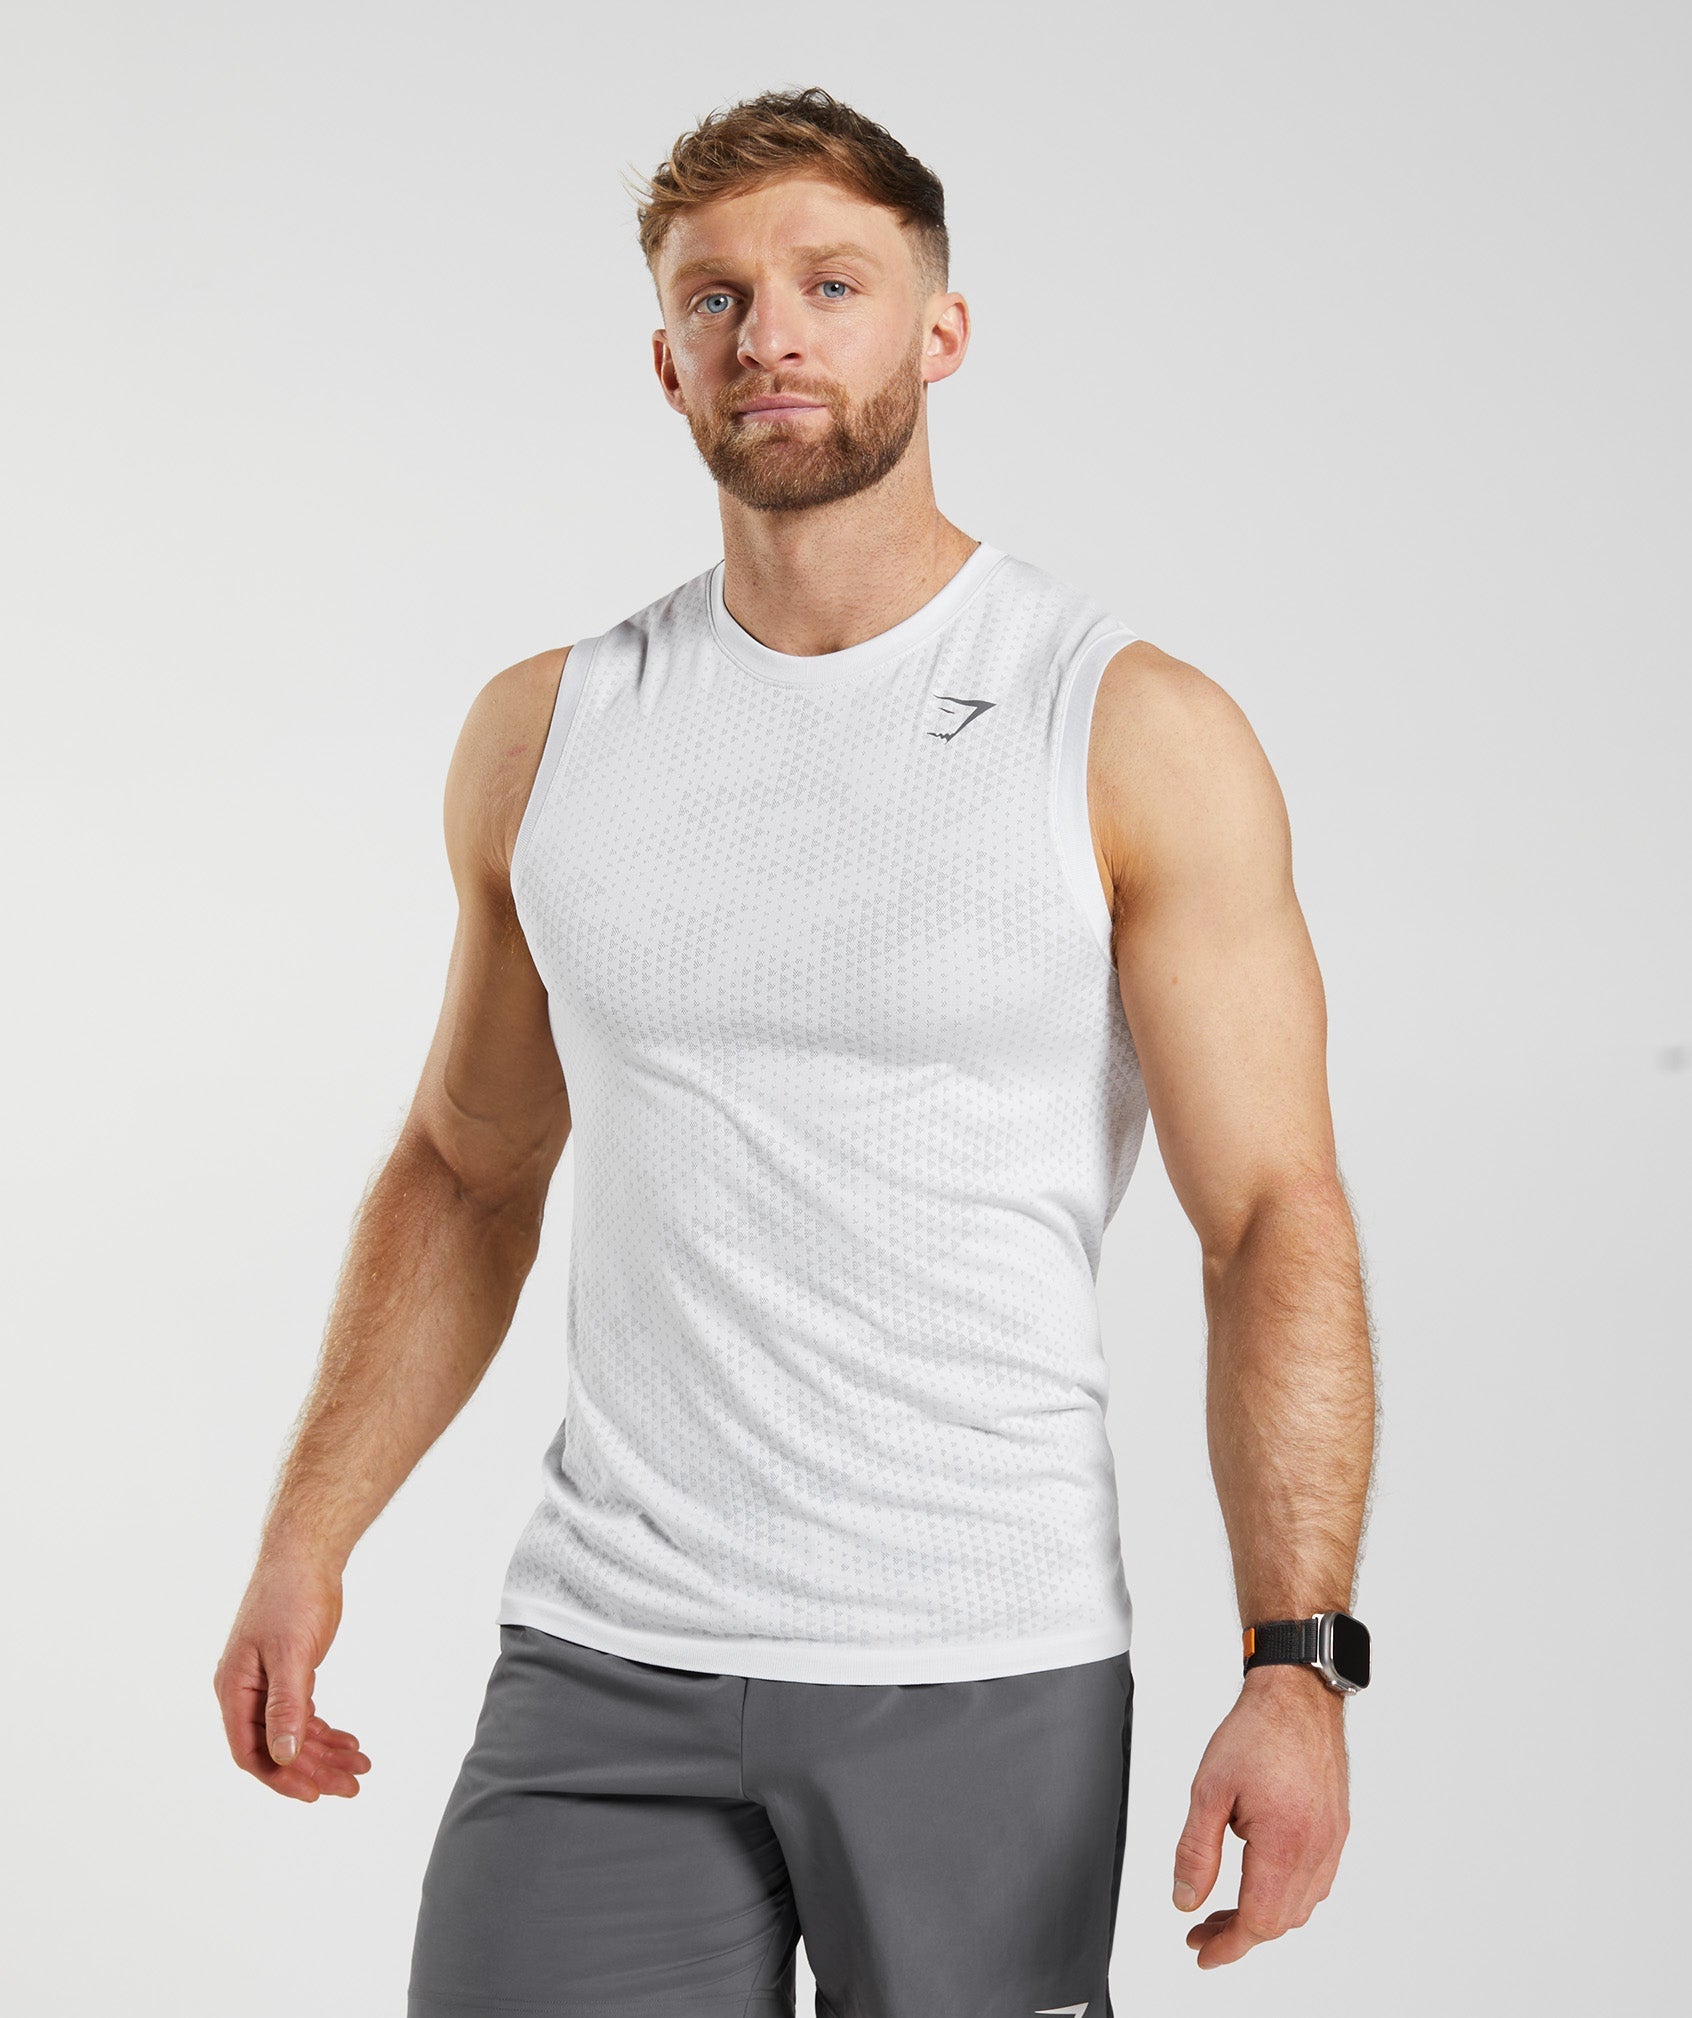 Sport Seamless Tank in White/Smokey Grey is out of stock